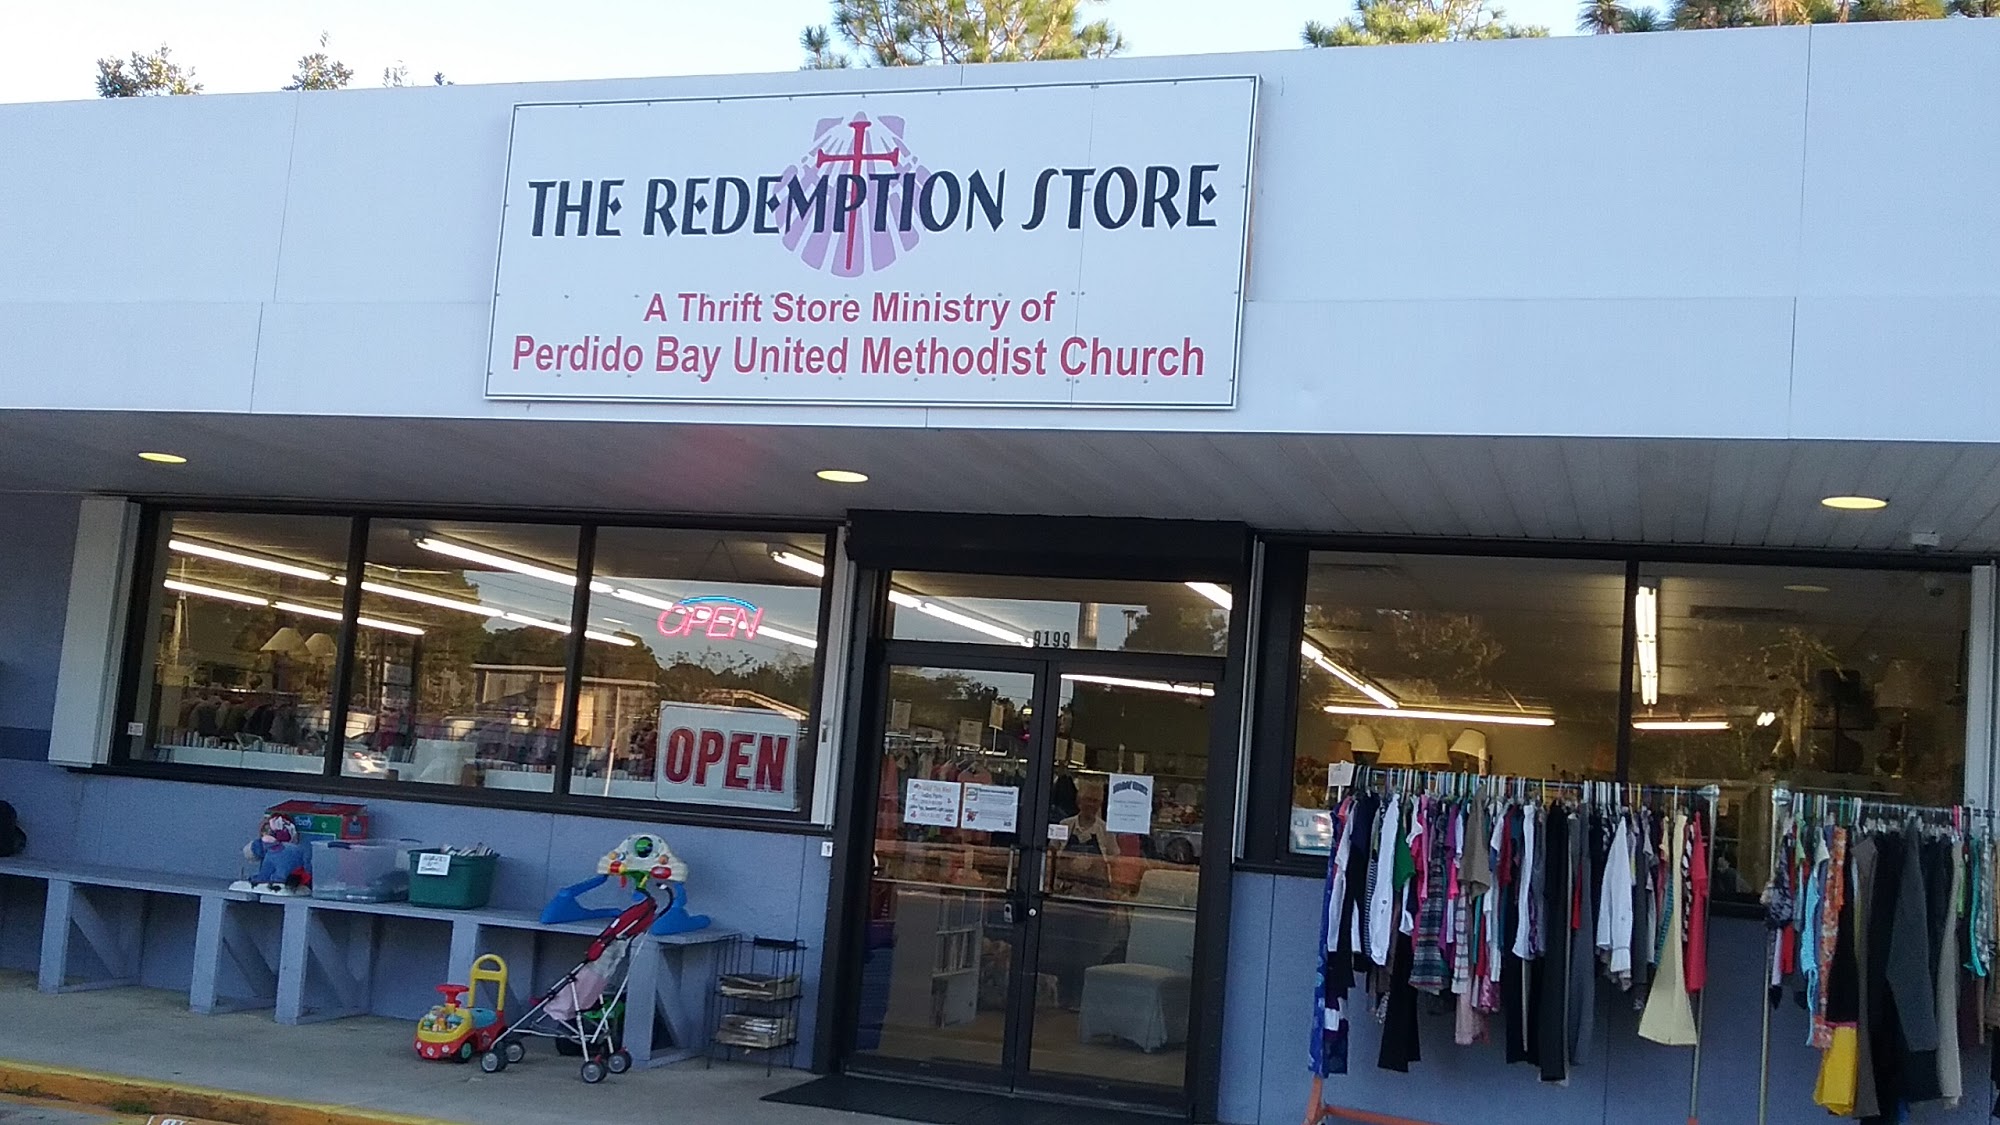 THE REDEMPTION STORE